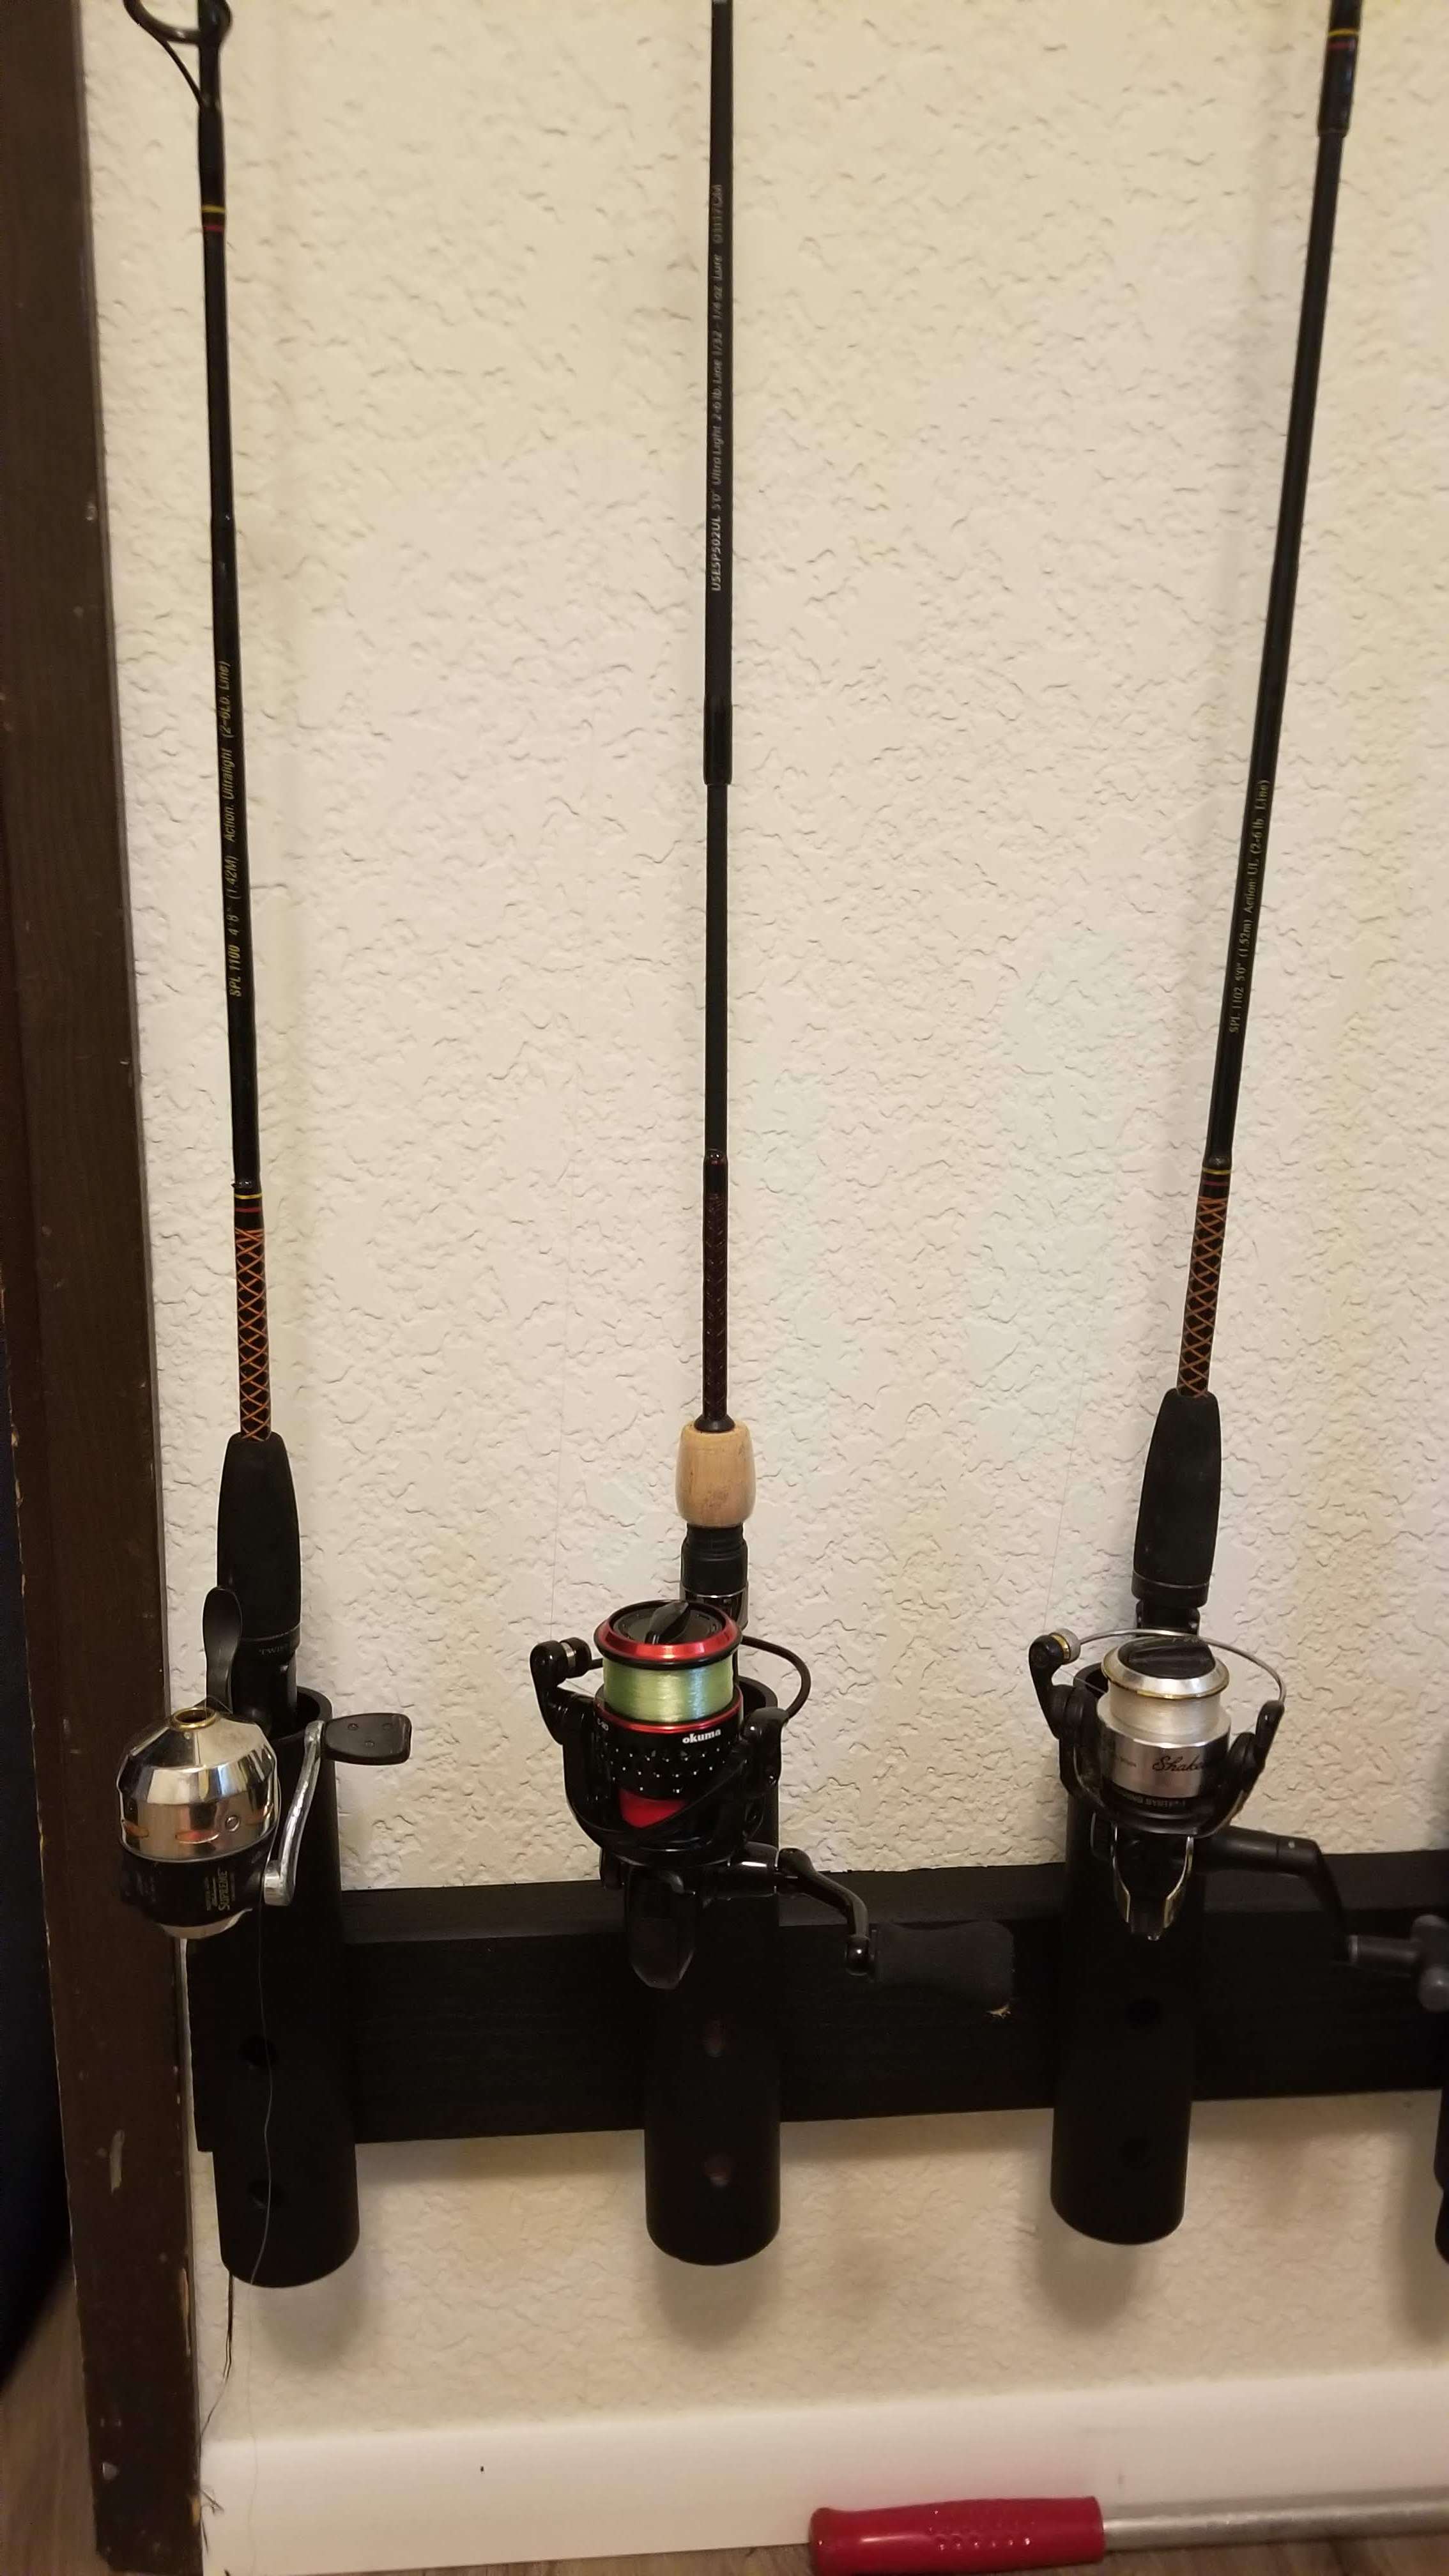 Need lots of help! Beginner - just bought a ton of rods and reels